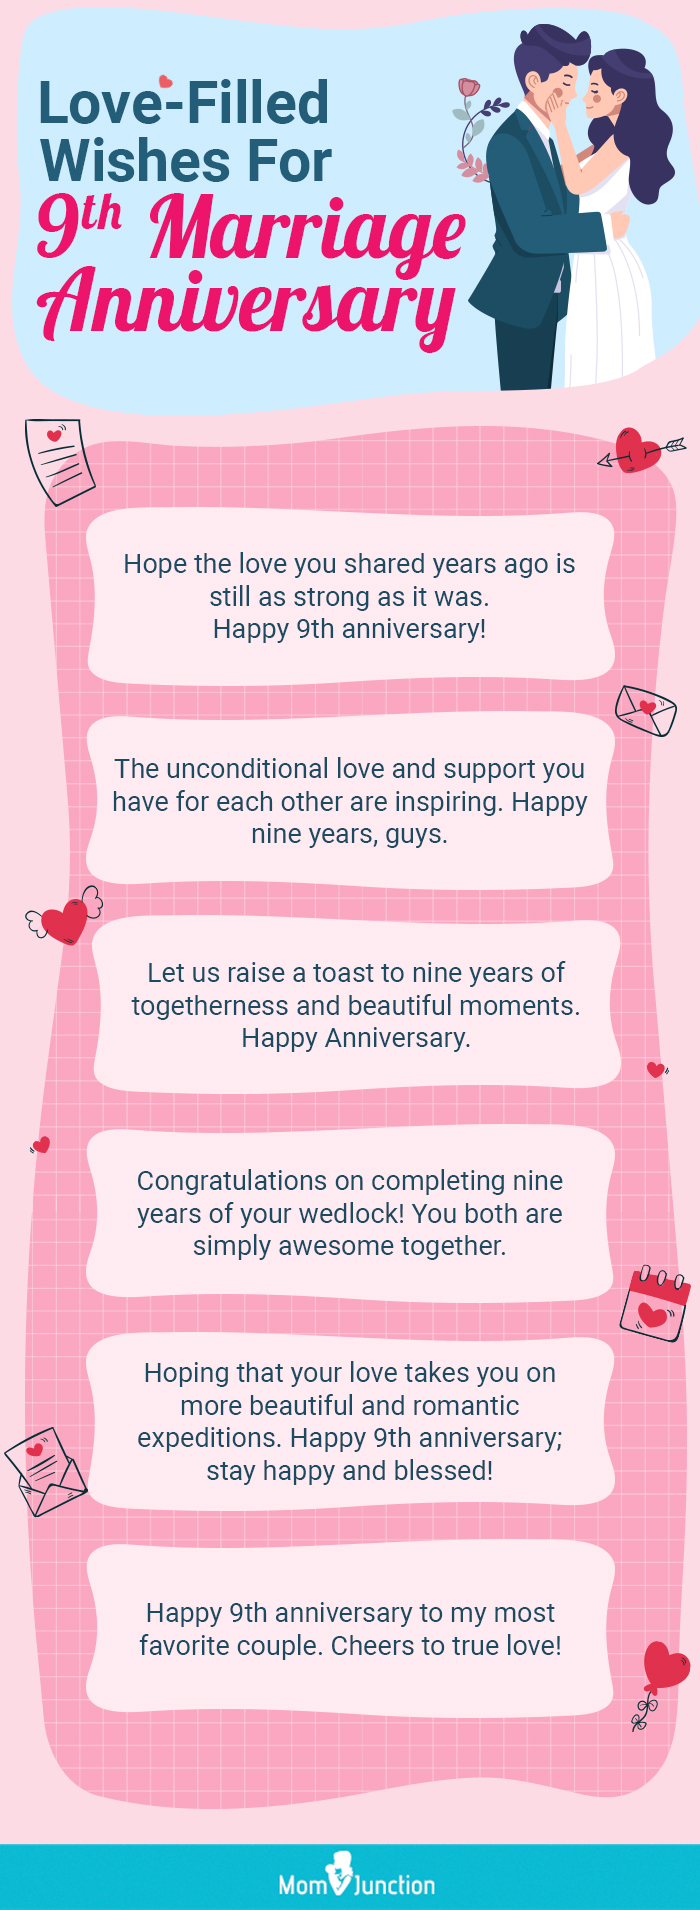 love-filled wishes for 9th marriage anniversary (infographic)